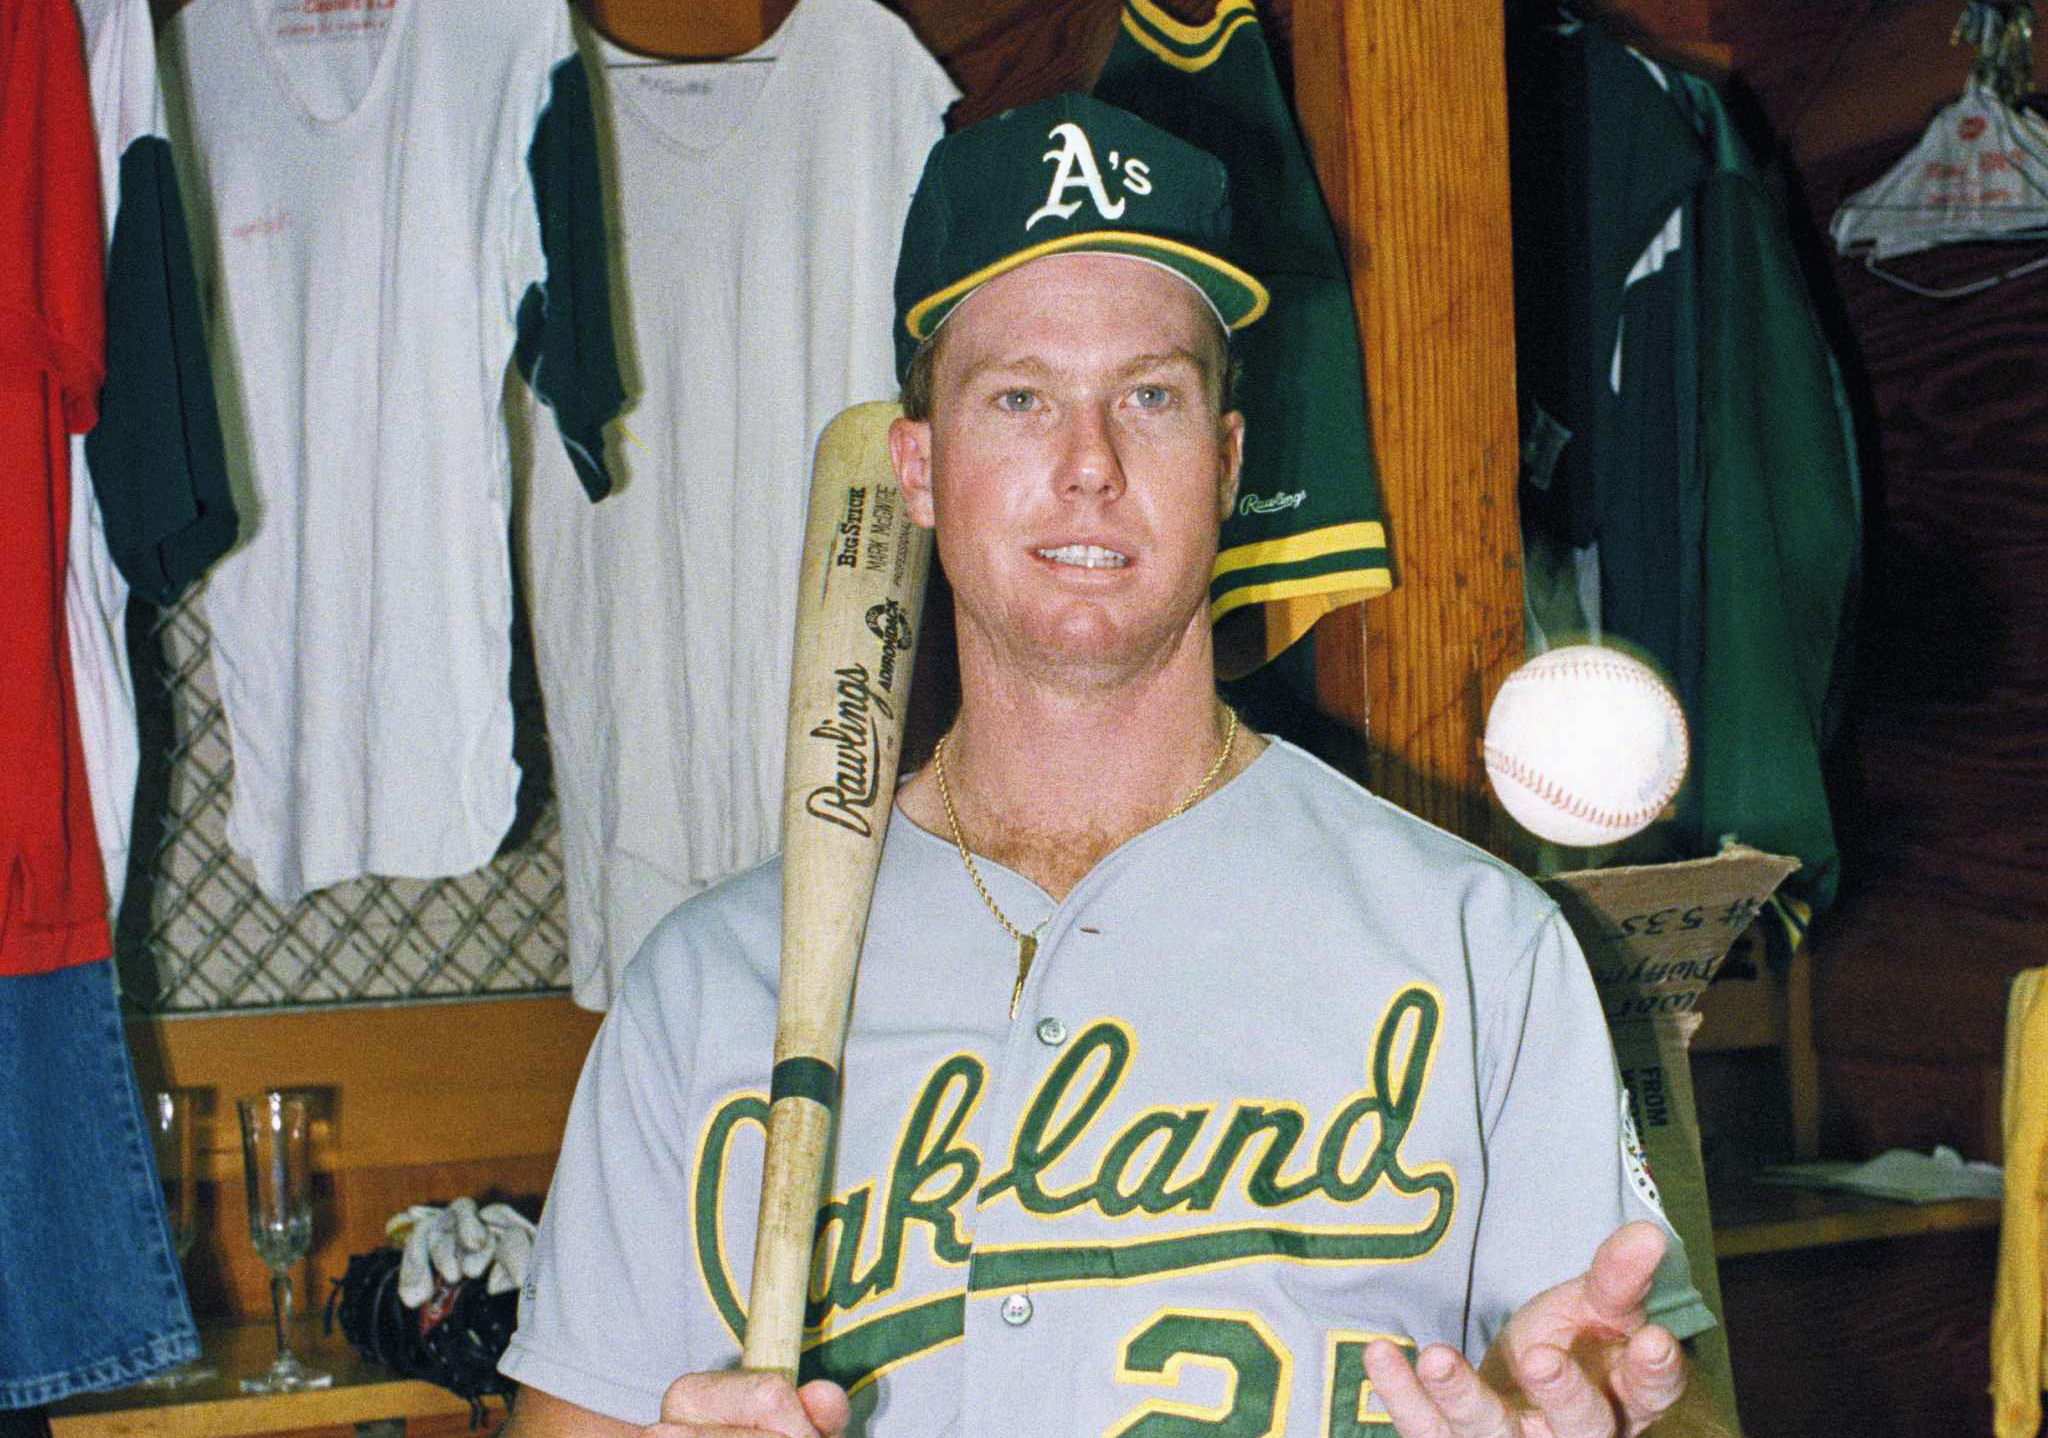 6 Most Valuable Mark McGwire Rookie Cards - Old Sports Cards